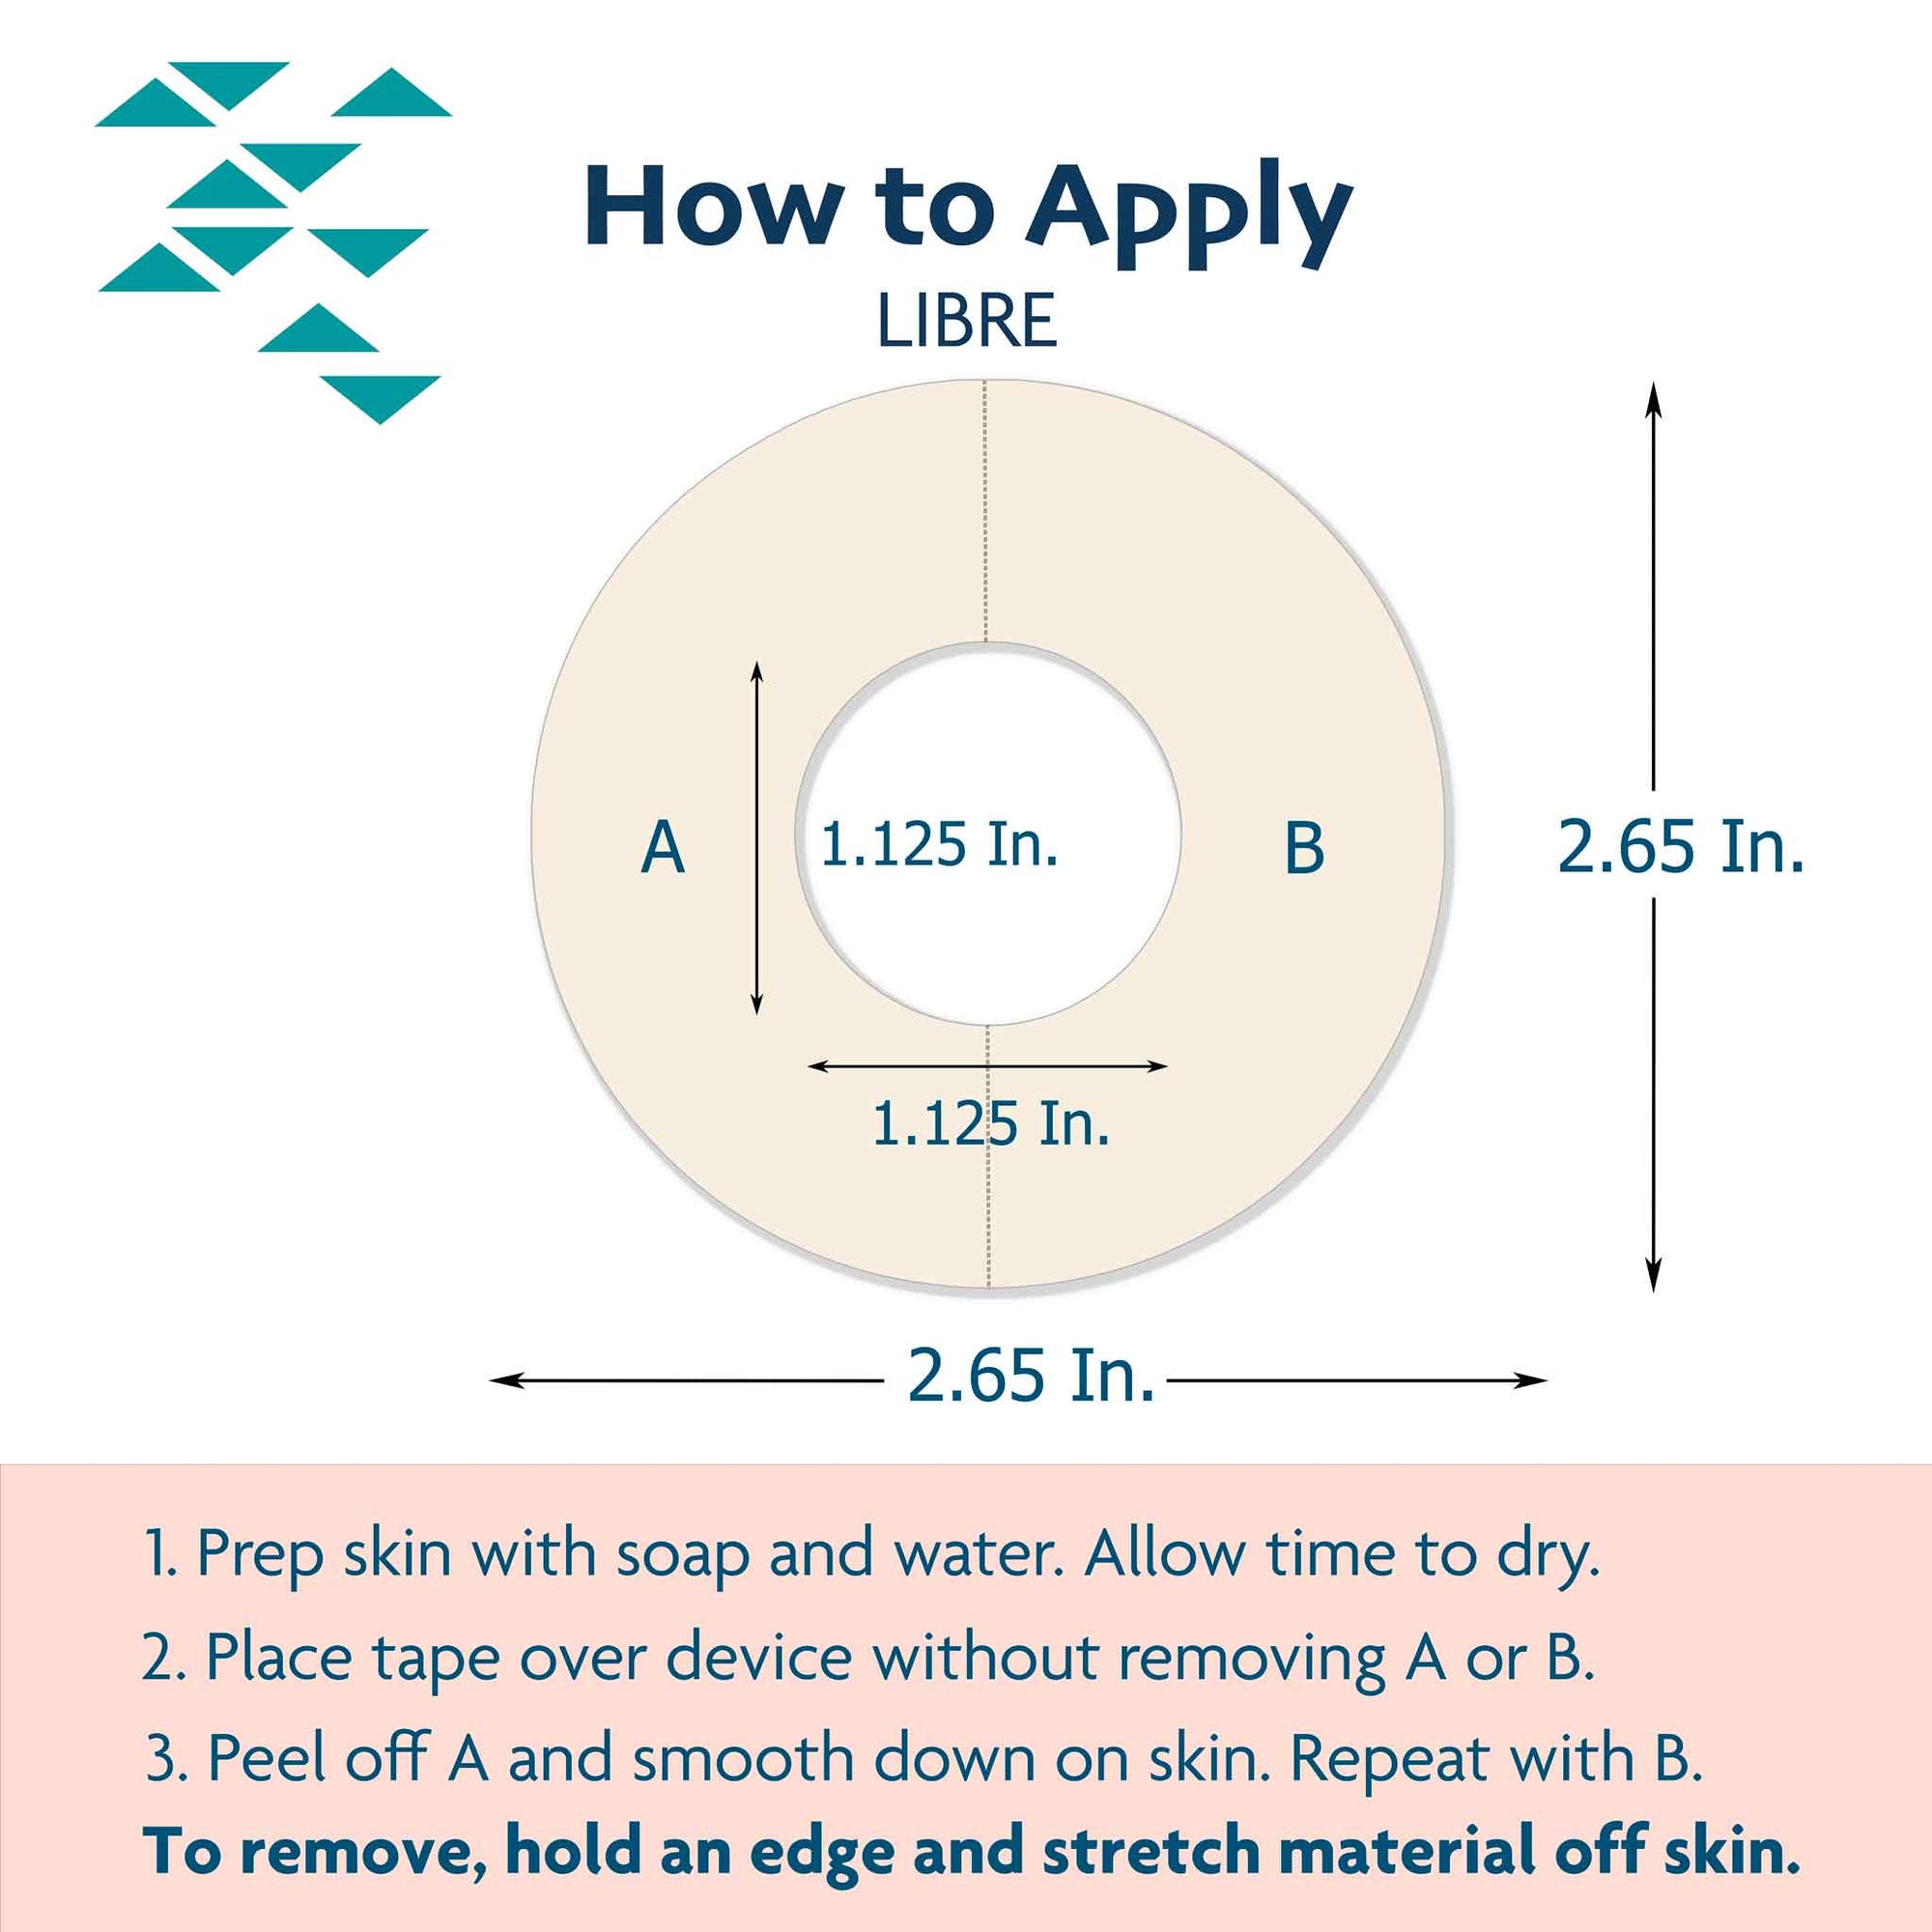 ExpressionMed Guide for applying libre tape to freestyle system